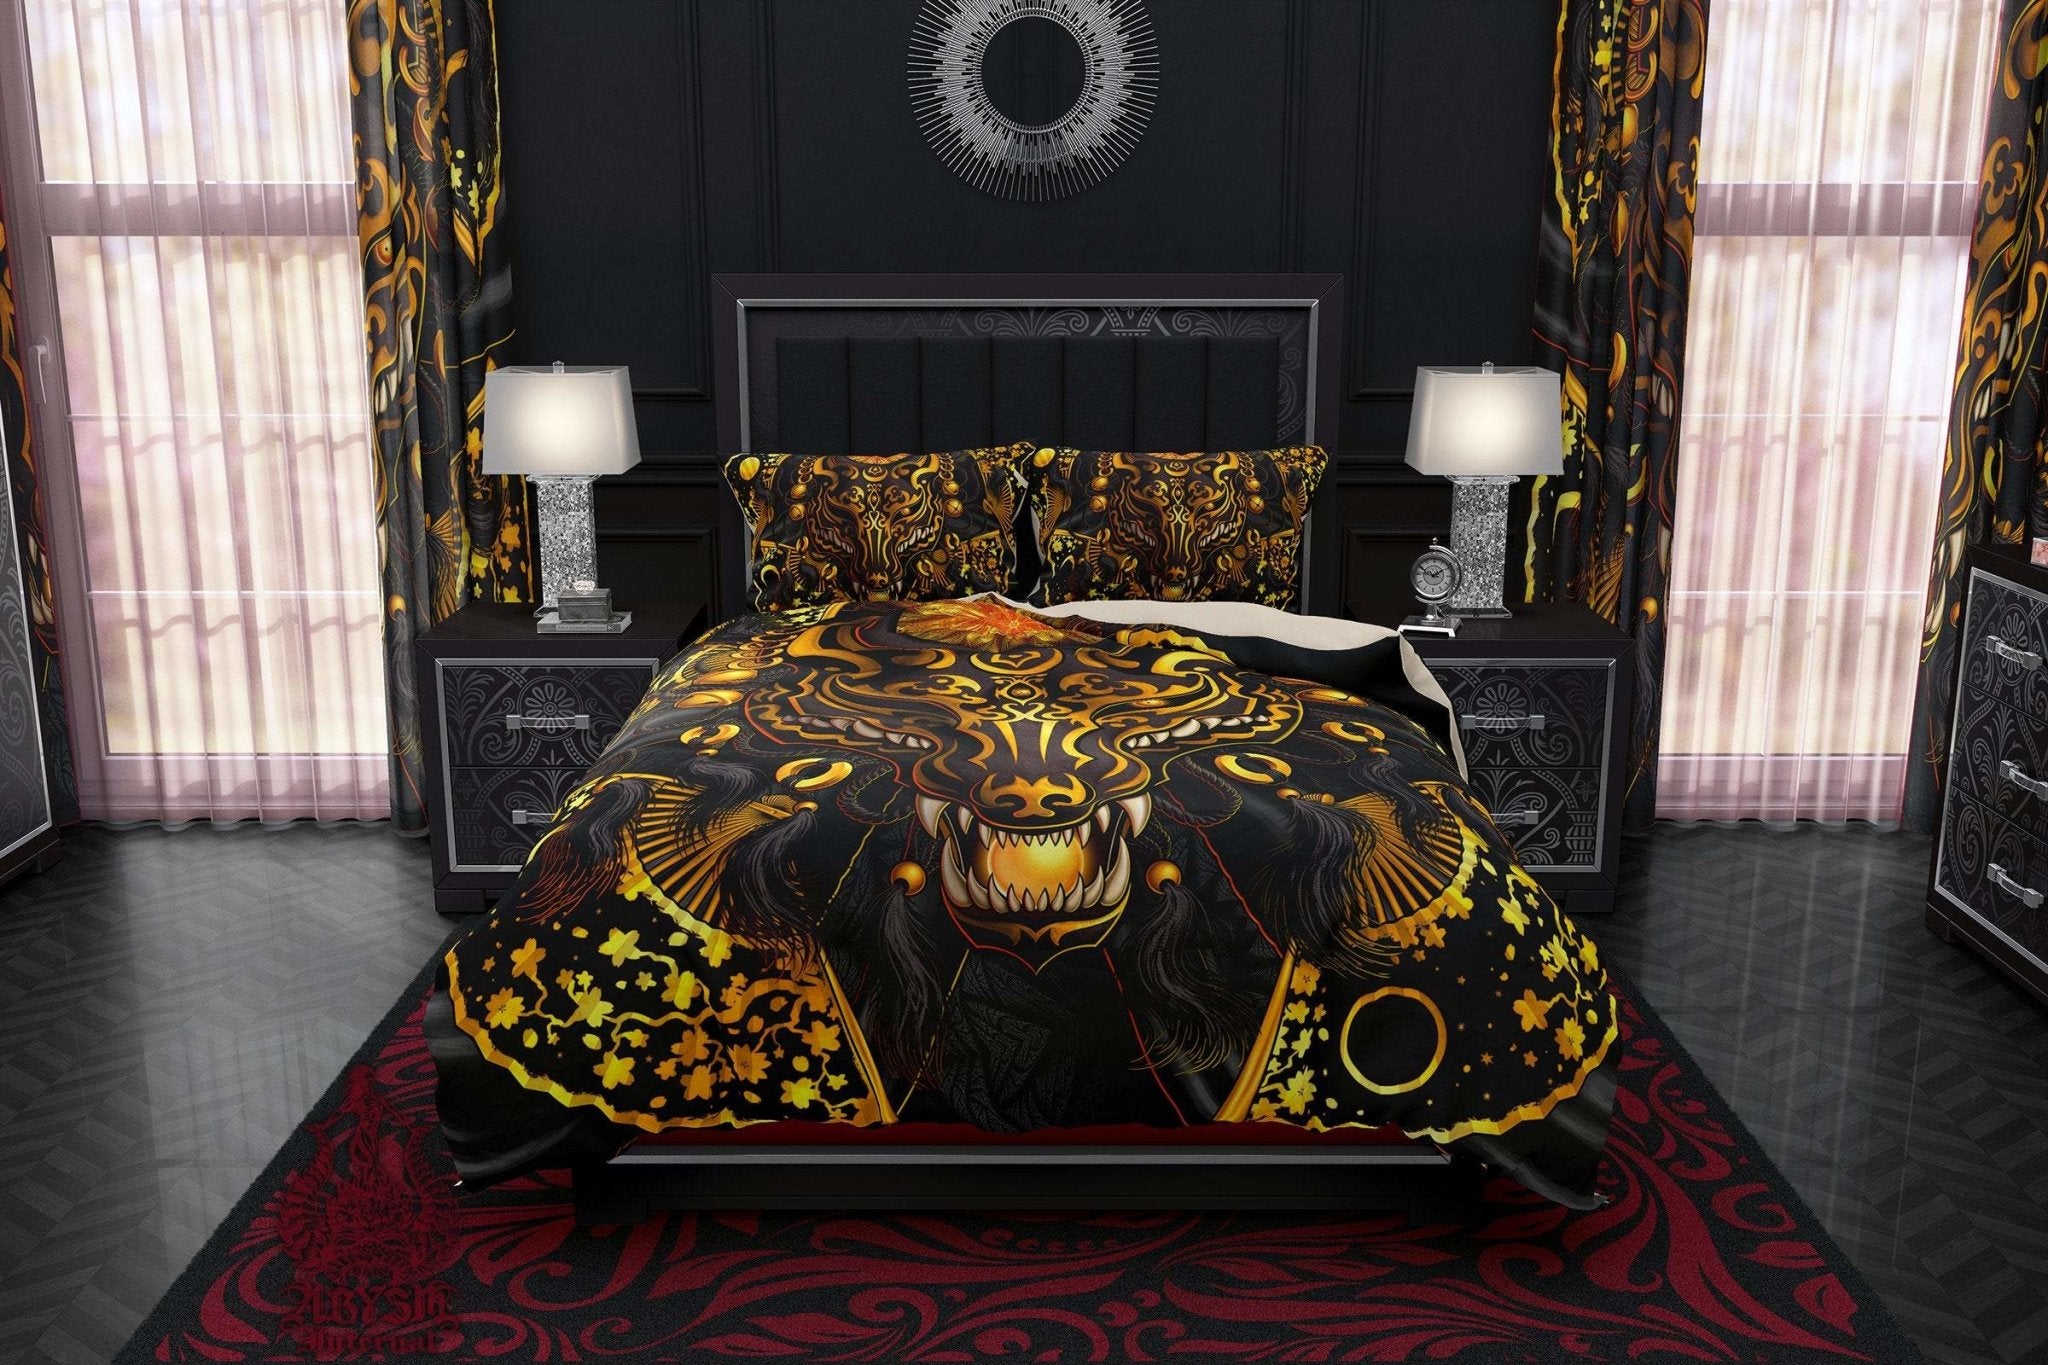 Kitsune Mask Bedding Set, Comforter and Duvet, Gamer Bed Cover and Bedroom Decor, Fox Okami, Anime Art, King, Queen and Twin Size - Black and Gold - Abysm Internal